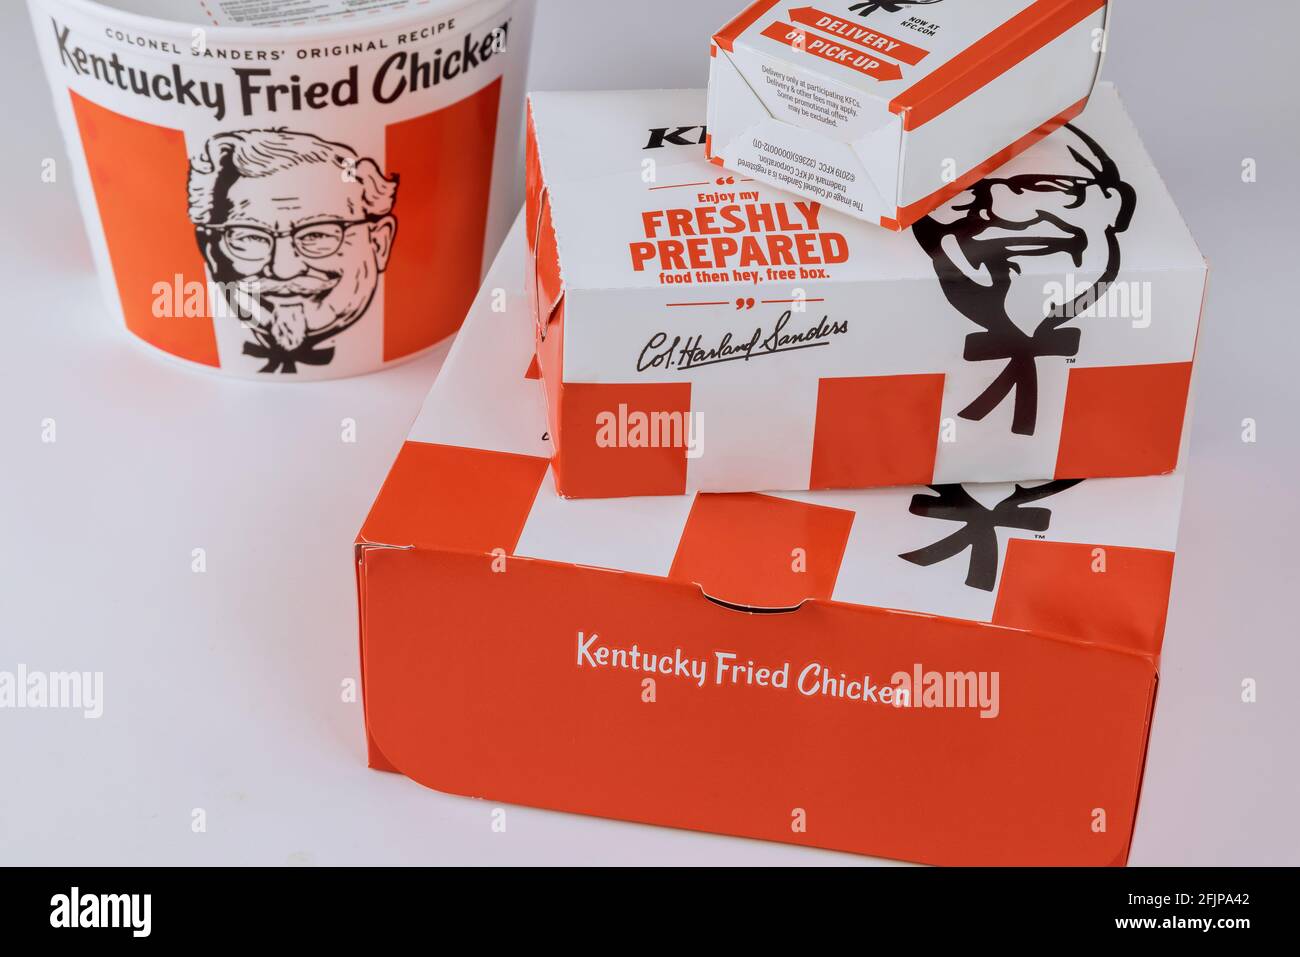 KFC famous fast food restaurant chain is a Kentucky Fried Chicken on set food box Stock Photo